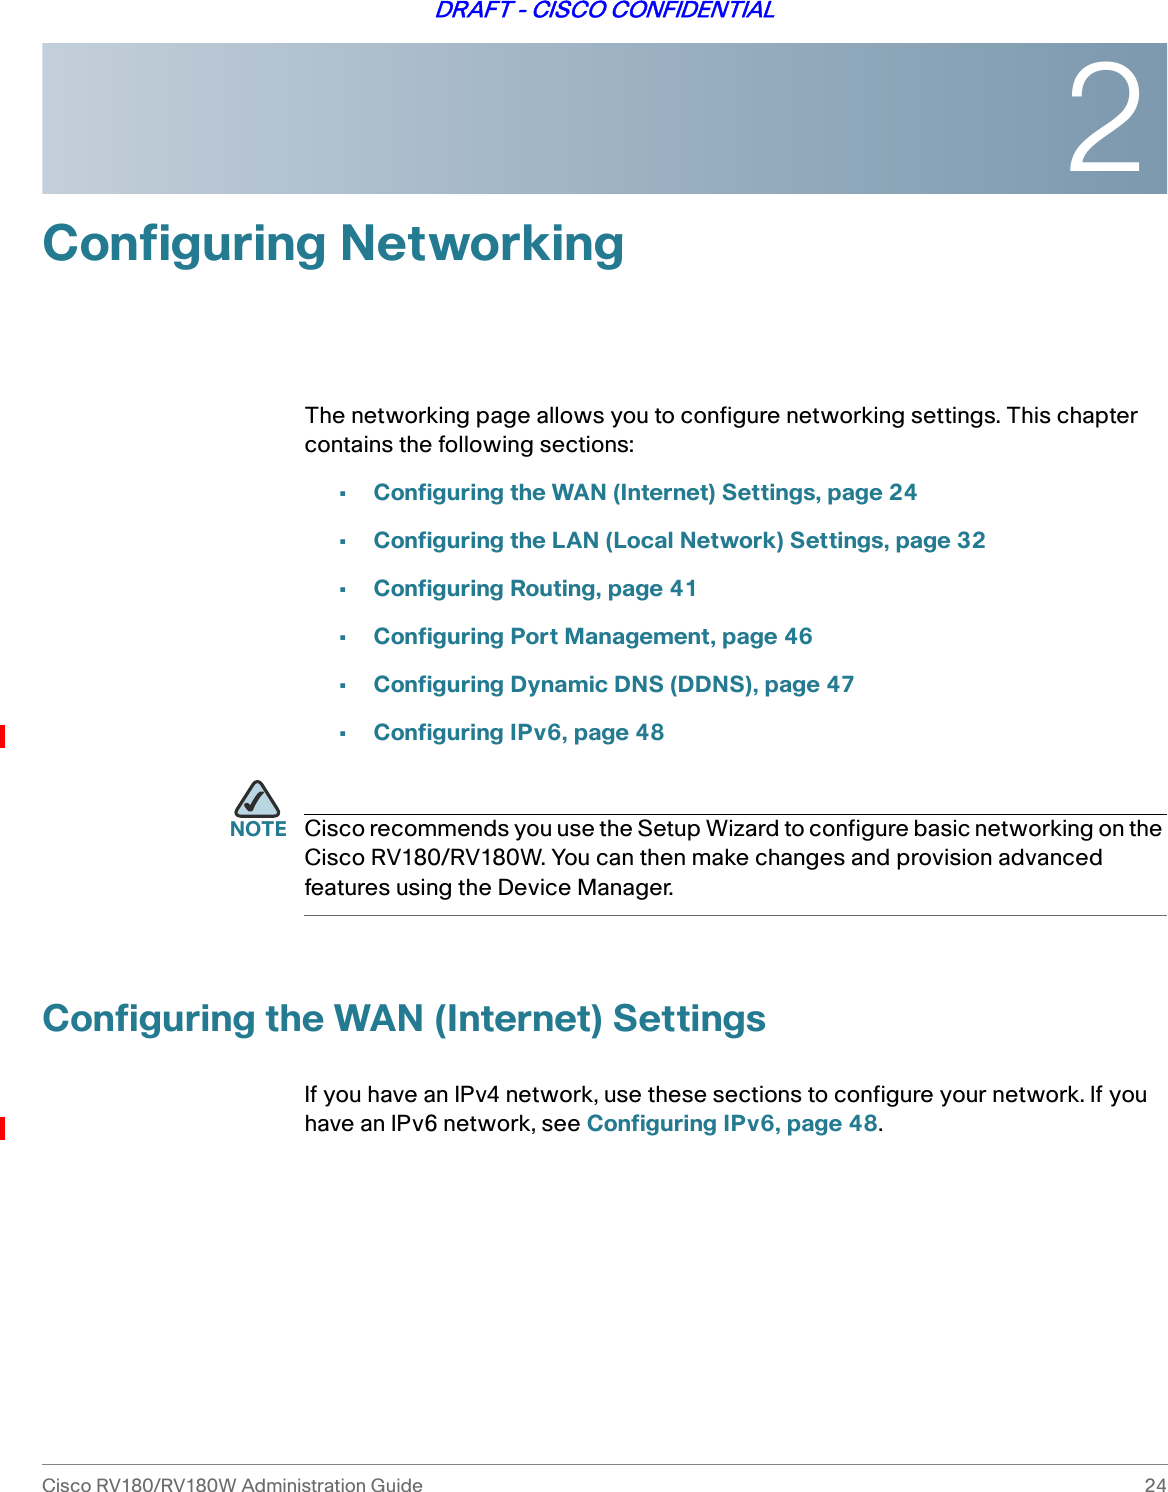 2Cisco RV180/RV180W Administration Guide 24DRAFT - CISCO CONFIDENTIALConfiguring NetworkingThe networking page allows you to configure networking settings. This chapter contains the following sections:•Configuring the WAN (Internet) Settings, page 24•Configuring the LAN (Local Network) Settings, page 32•Configuring Routing, page 41•Configuring Port Management, page 46•Configuring Dynamic DNS (DDNS), page 47•Configuring IPv6, page 48NOTE Cisco recommends you use the Setup Wizard to configure basic networking on the Cisco RV180/RV180W. You can then make changes and provision advanced features using the Device Manager.Configuring the WAN (Internet) SettingsIf you have an IPv4 network, use these sections to configure your network. If you have an IPv6 network, see Configuring IPv6, page 48.